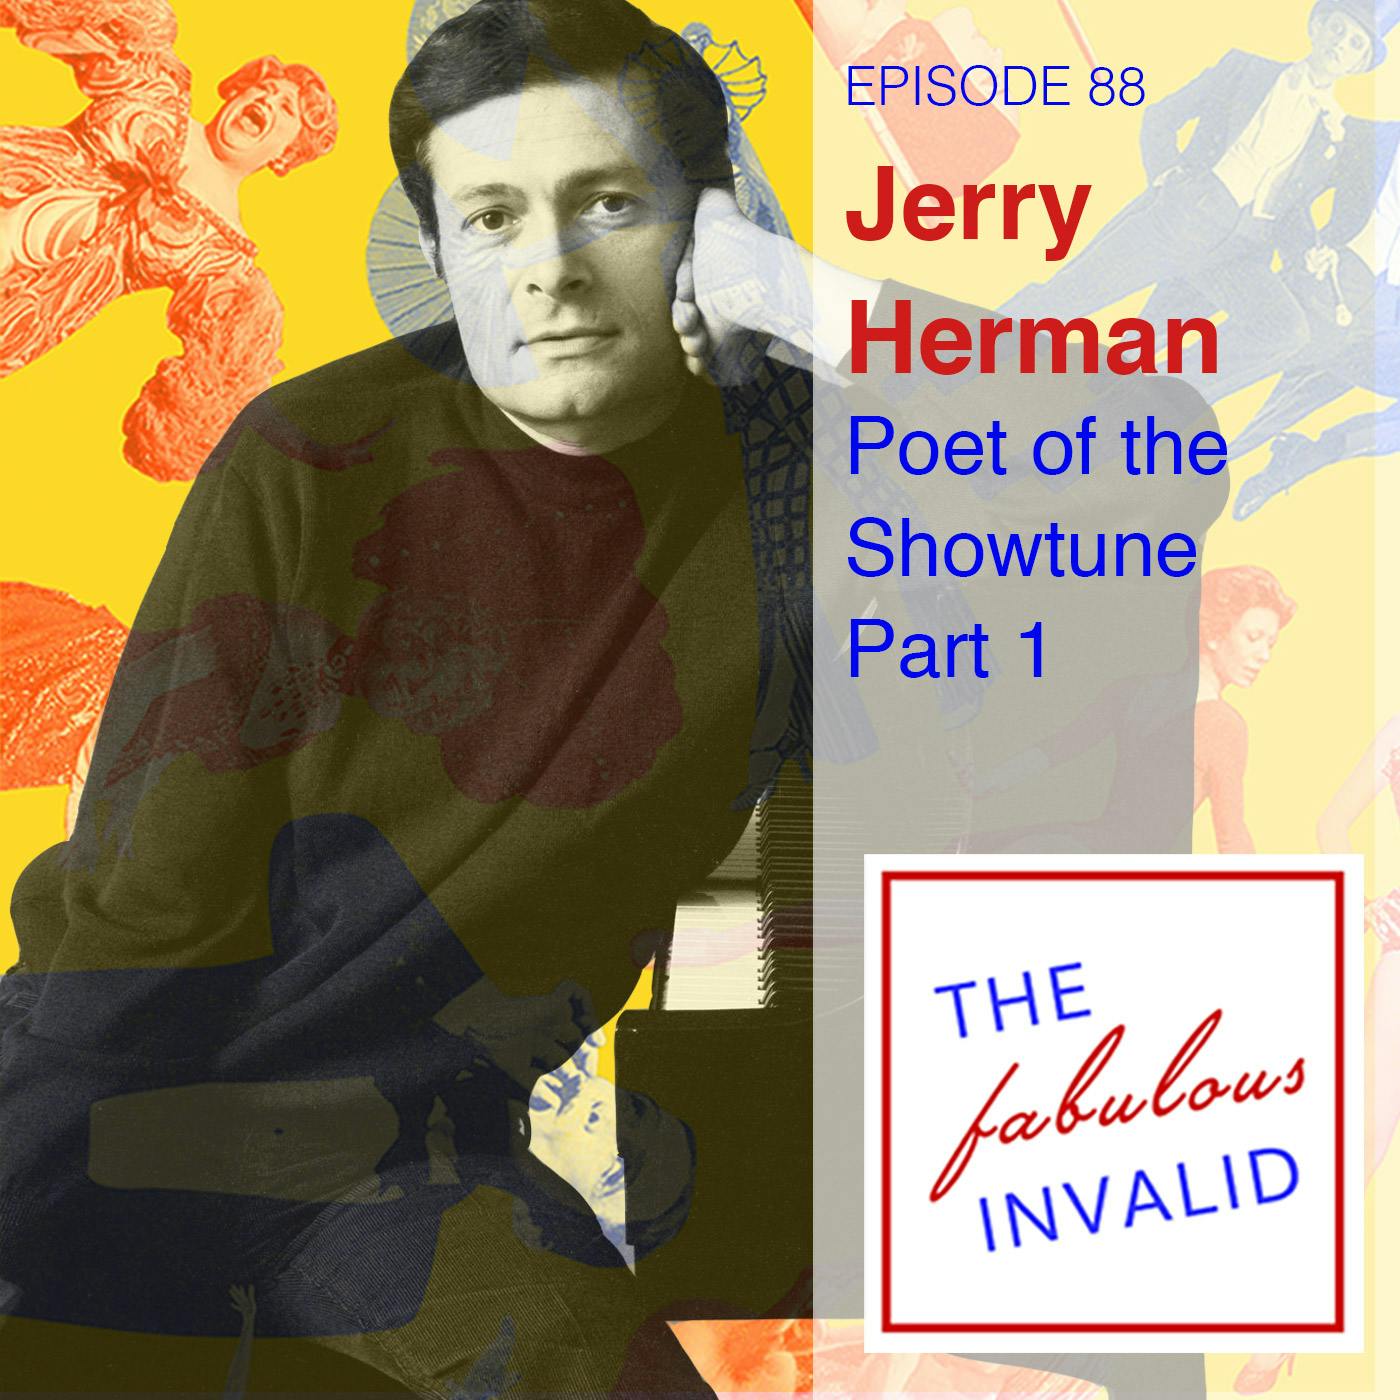 Episode 88: Jerry Herman: Poet of the Showtune, Part One